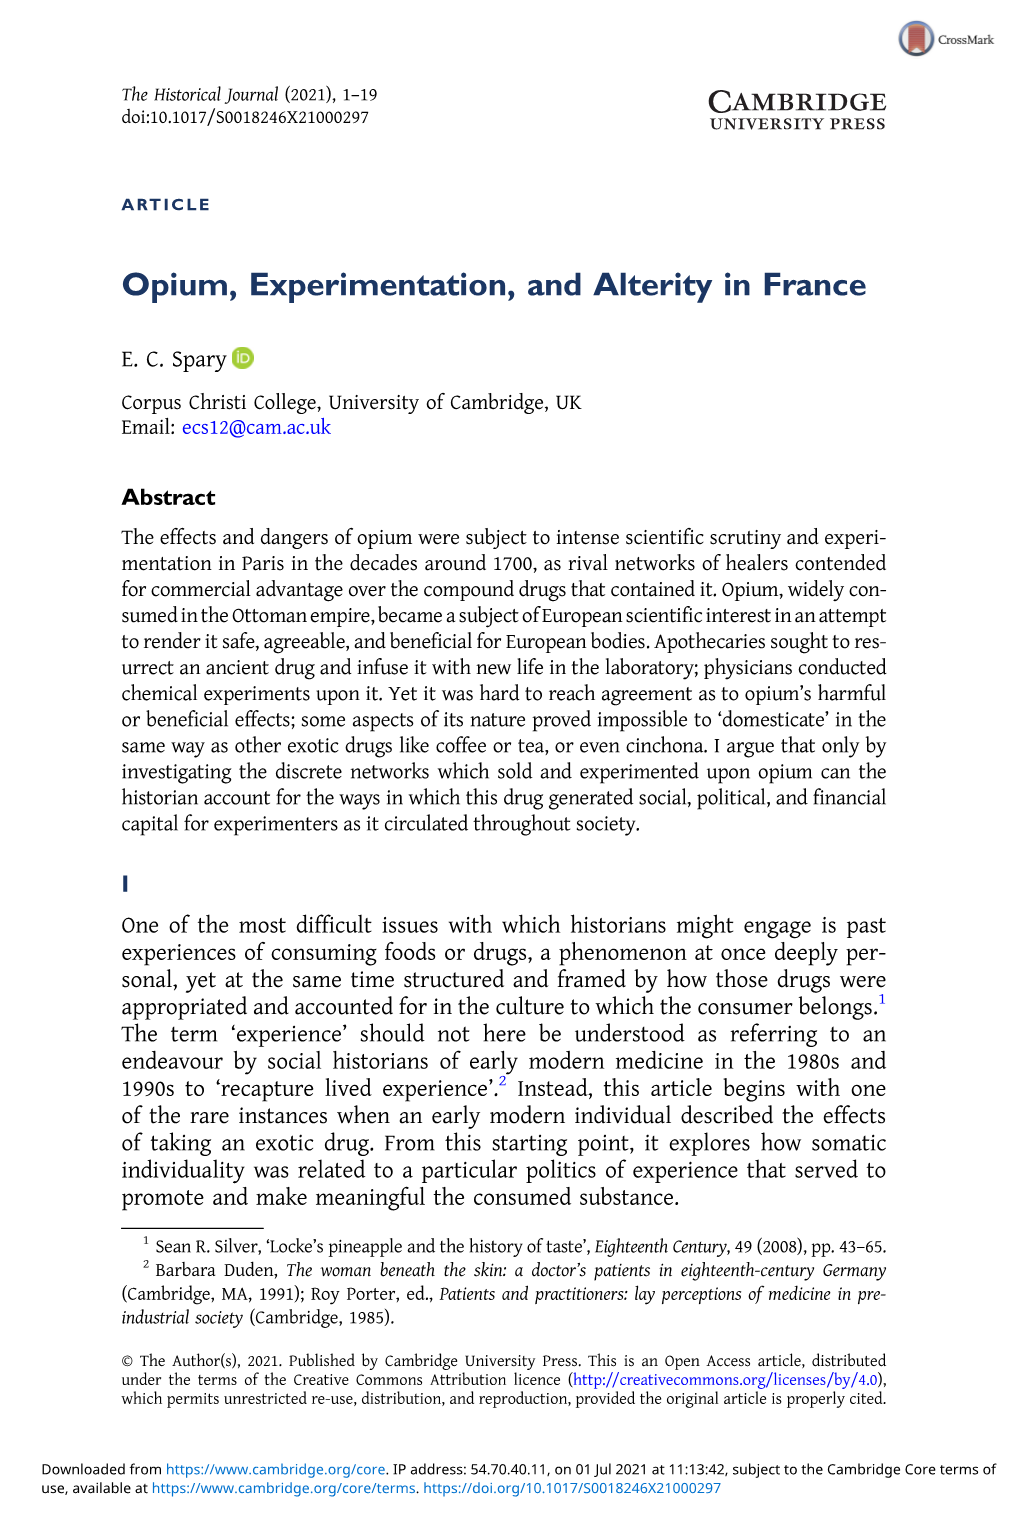 Opium, Experimentation, and Alterity in France